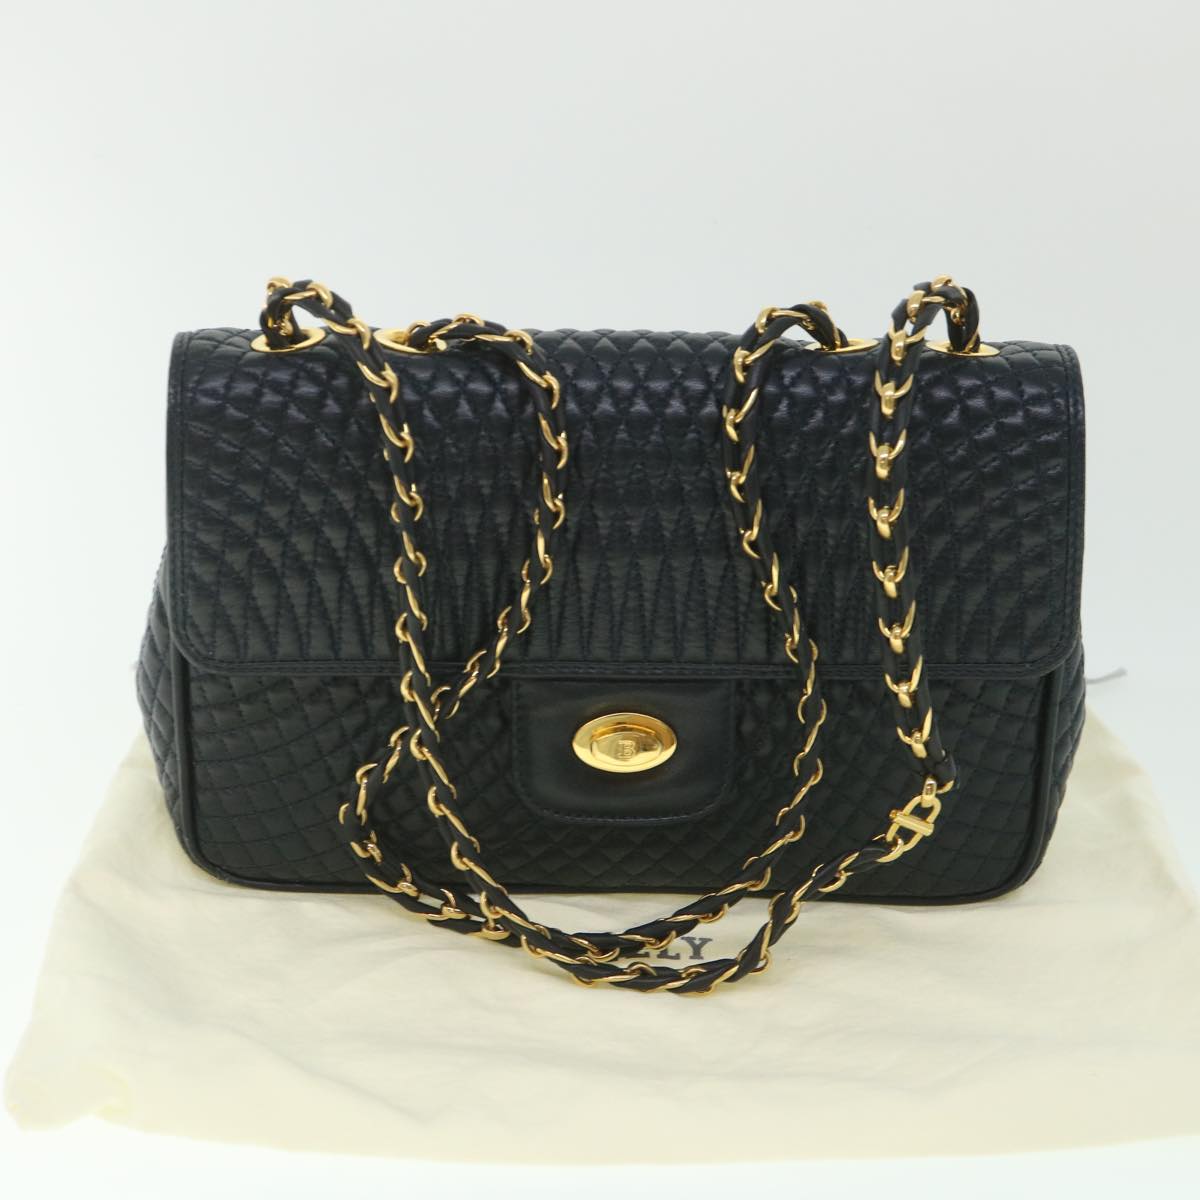 BALLY Chain Shoulder Bag Leather Black Auth 56374